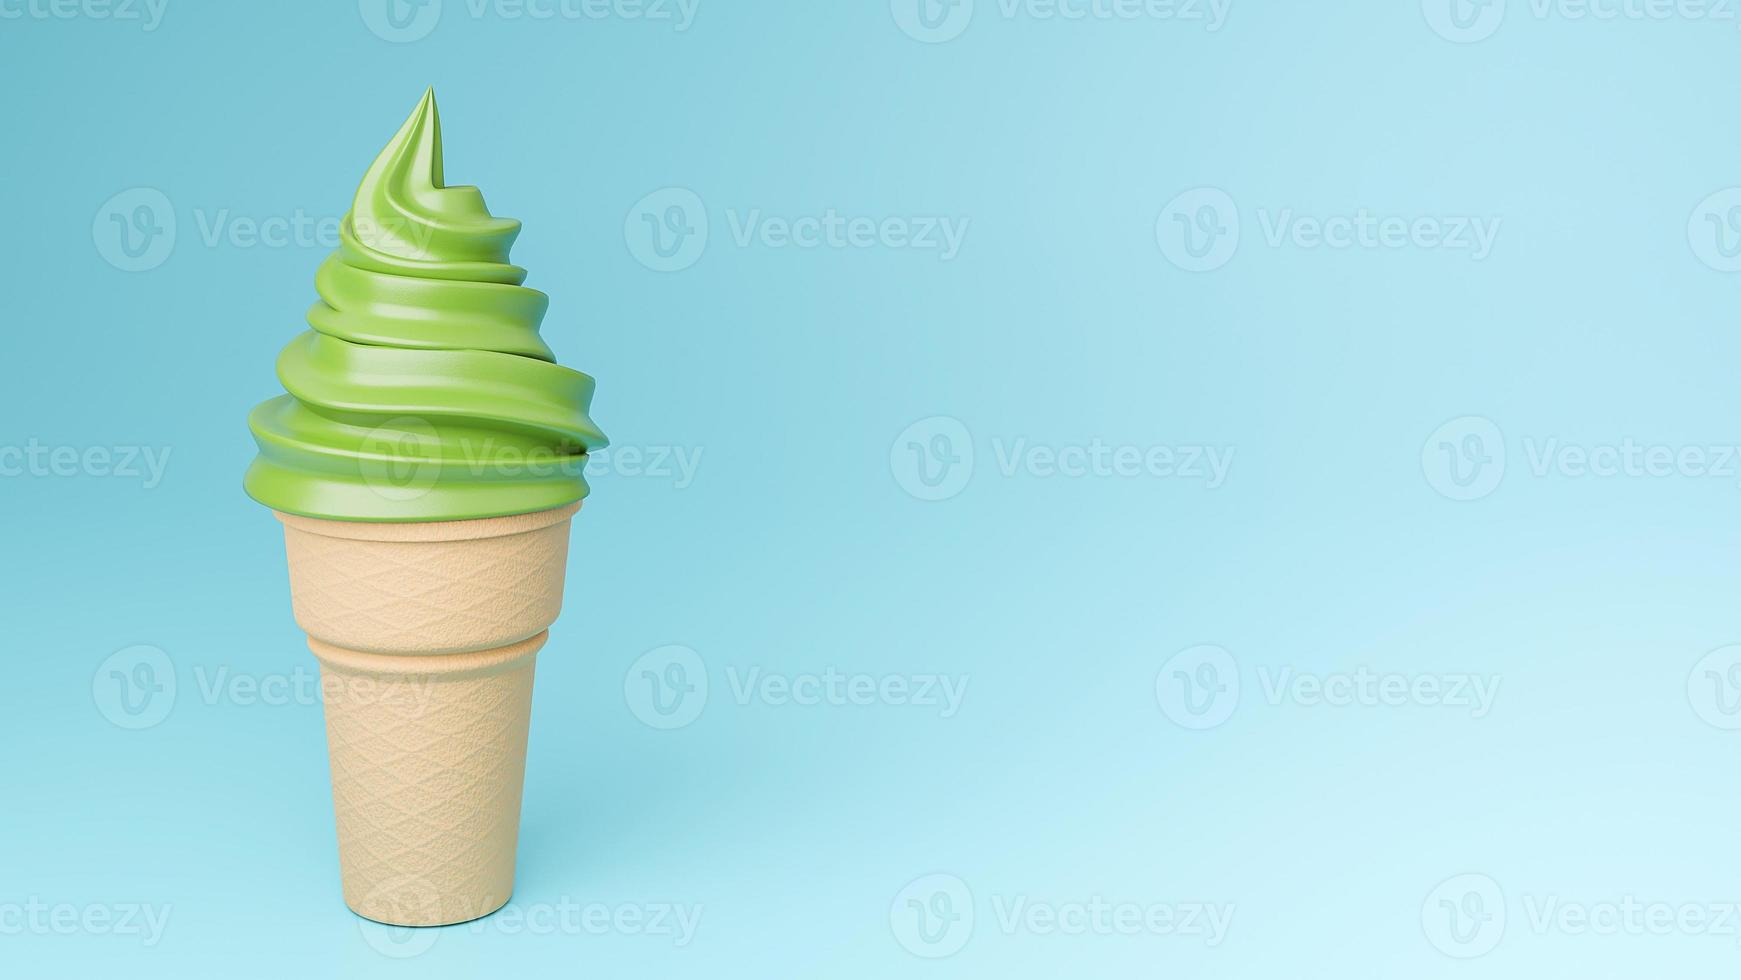 Soft serve ice cream of green tea flavours on crispy cone on blue background.,3d model and illustration. photo